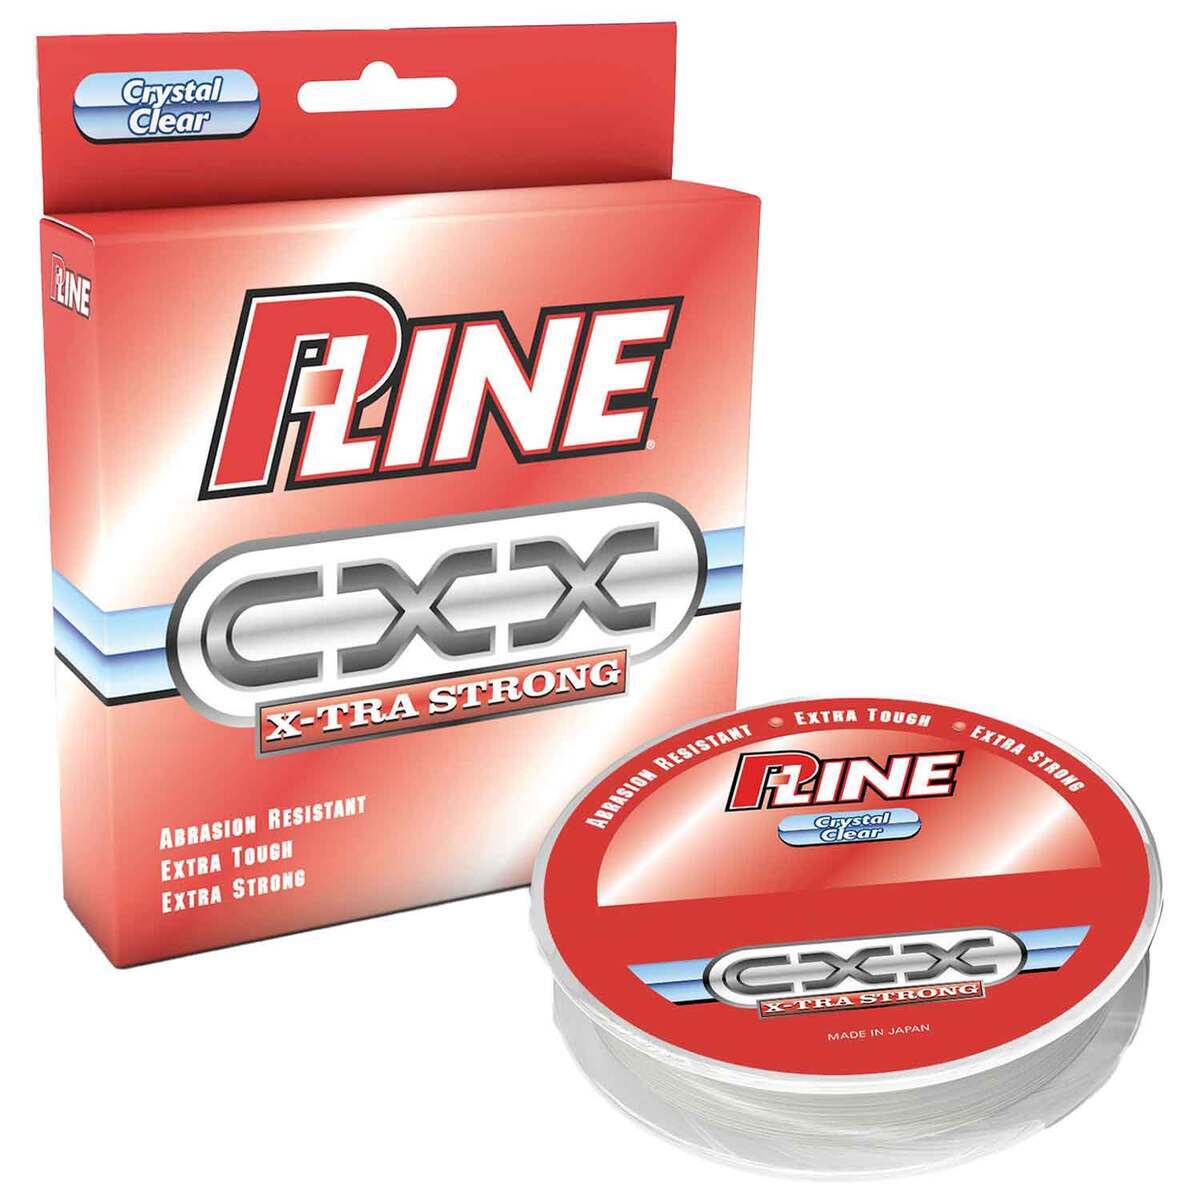 P-Line CXX X-tra Strong Copolymer Fishing Line - 4lb, Clear